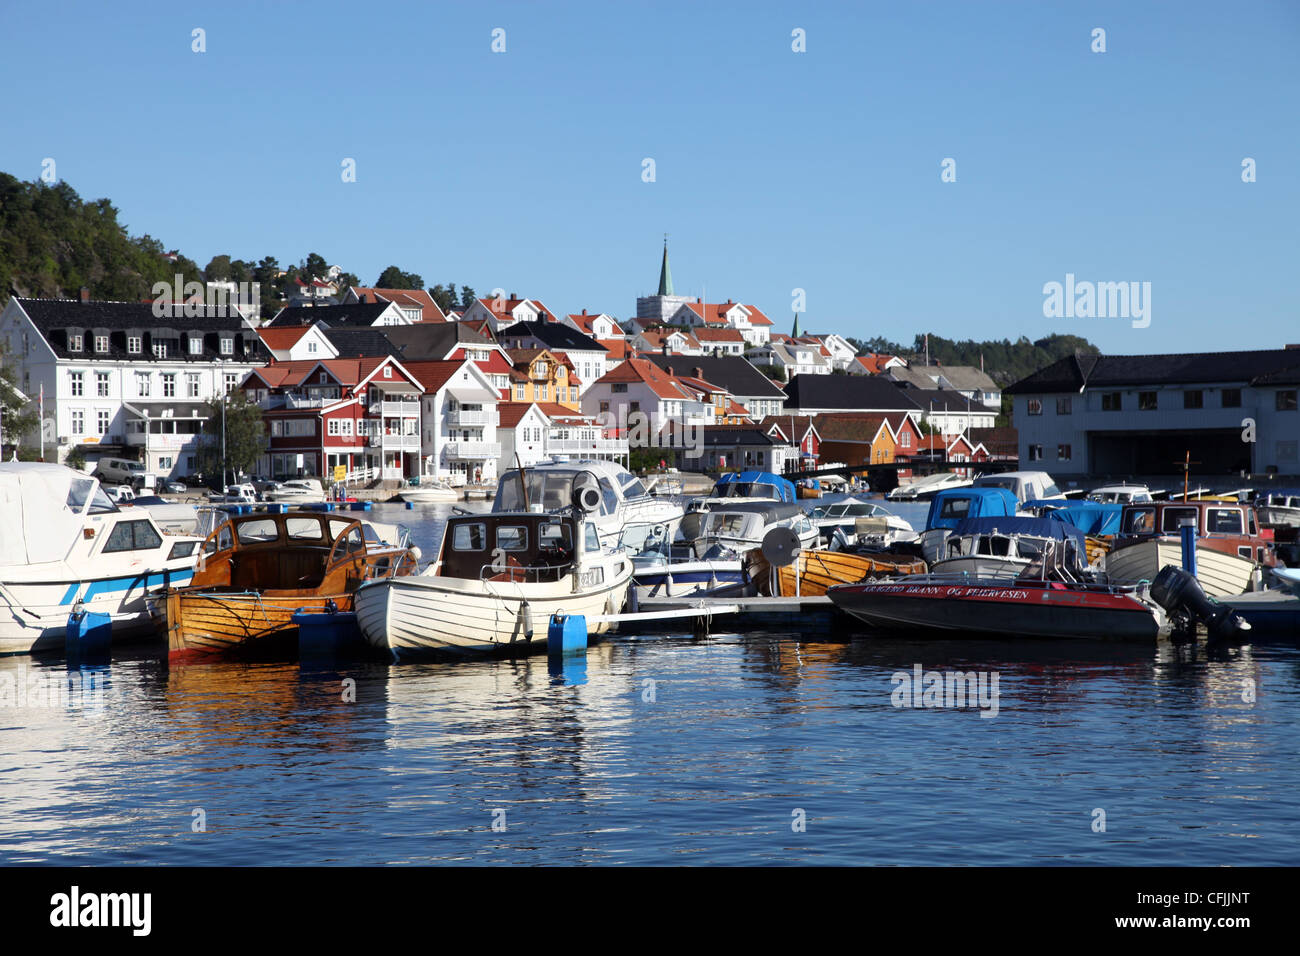 Local boats crammed into harbour at Kragero, South Norway, Scandinavia, Europe Stock Photo